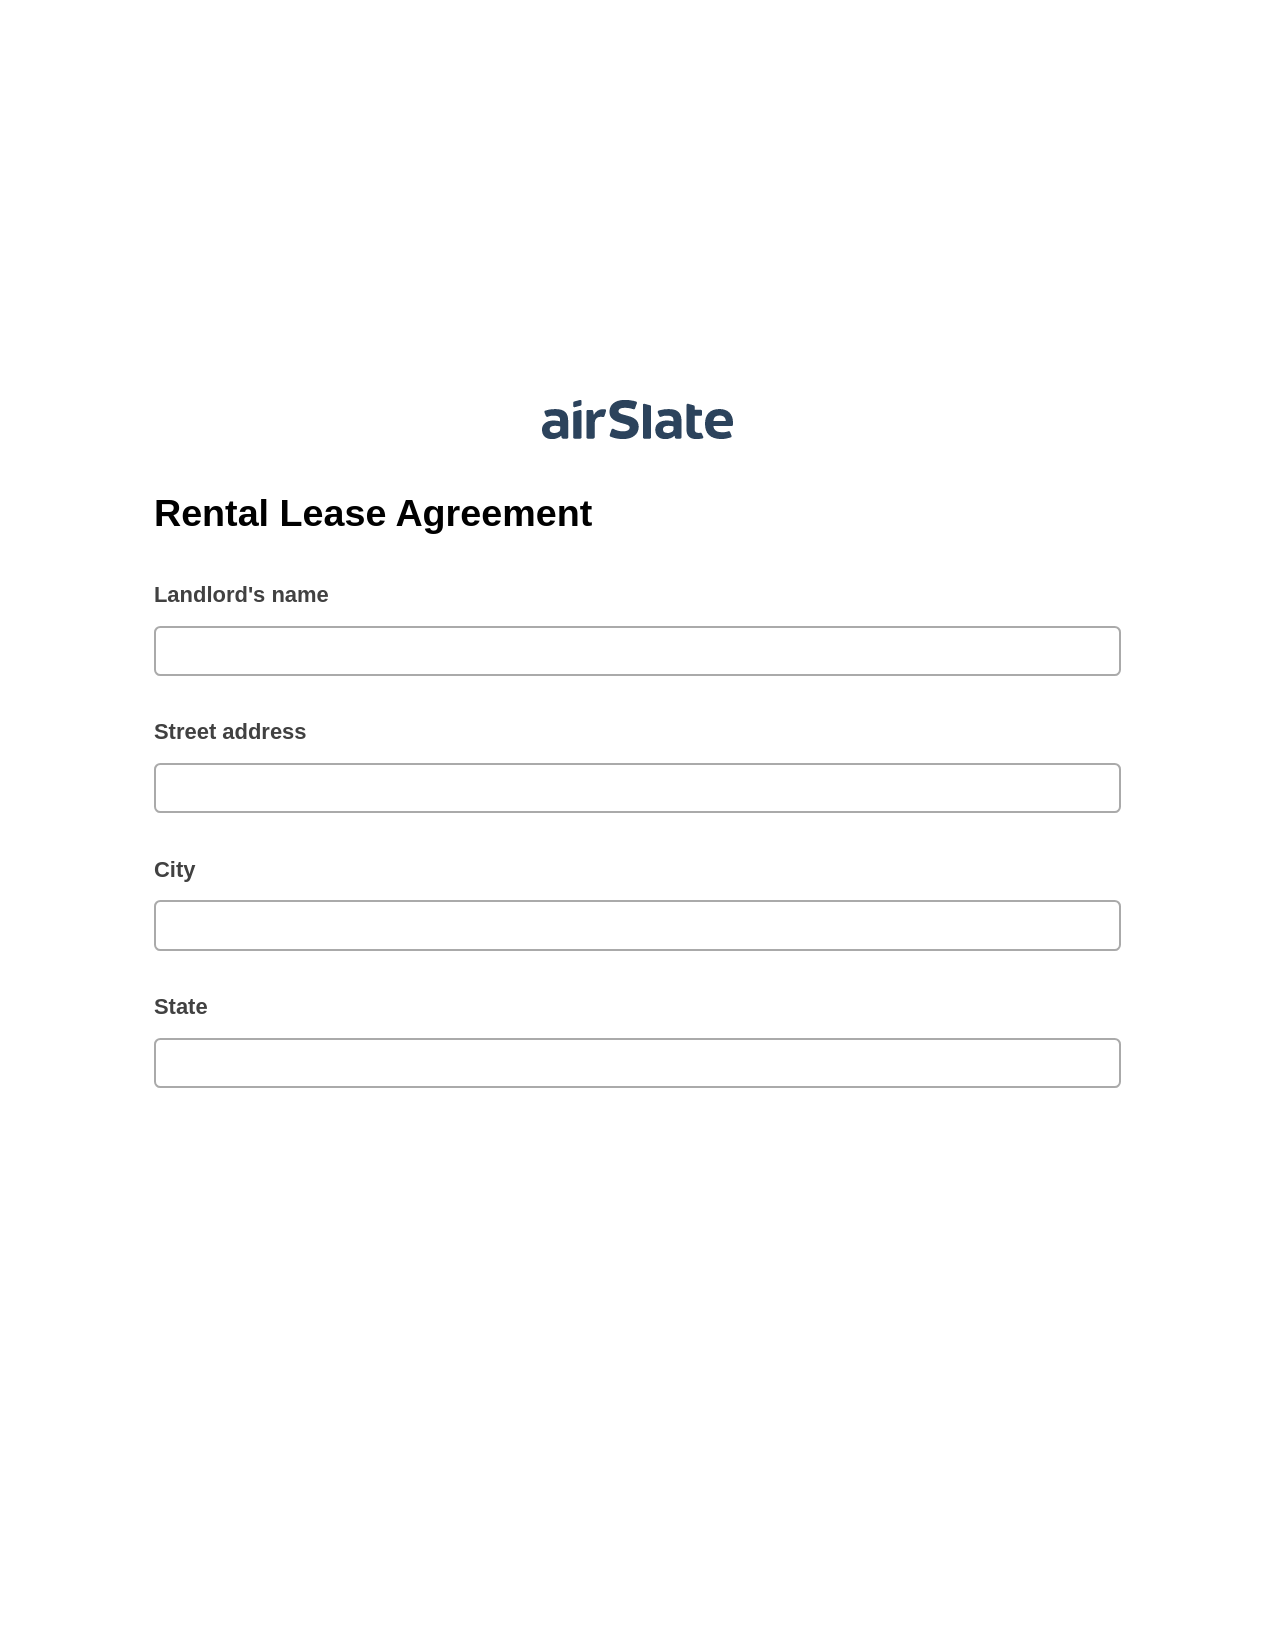 Rental Lease Agreement Pre-fill from Google Sheets Bot, Create slate addon, Export to Smartsheet